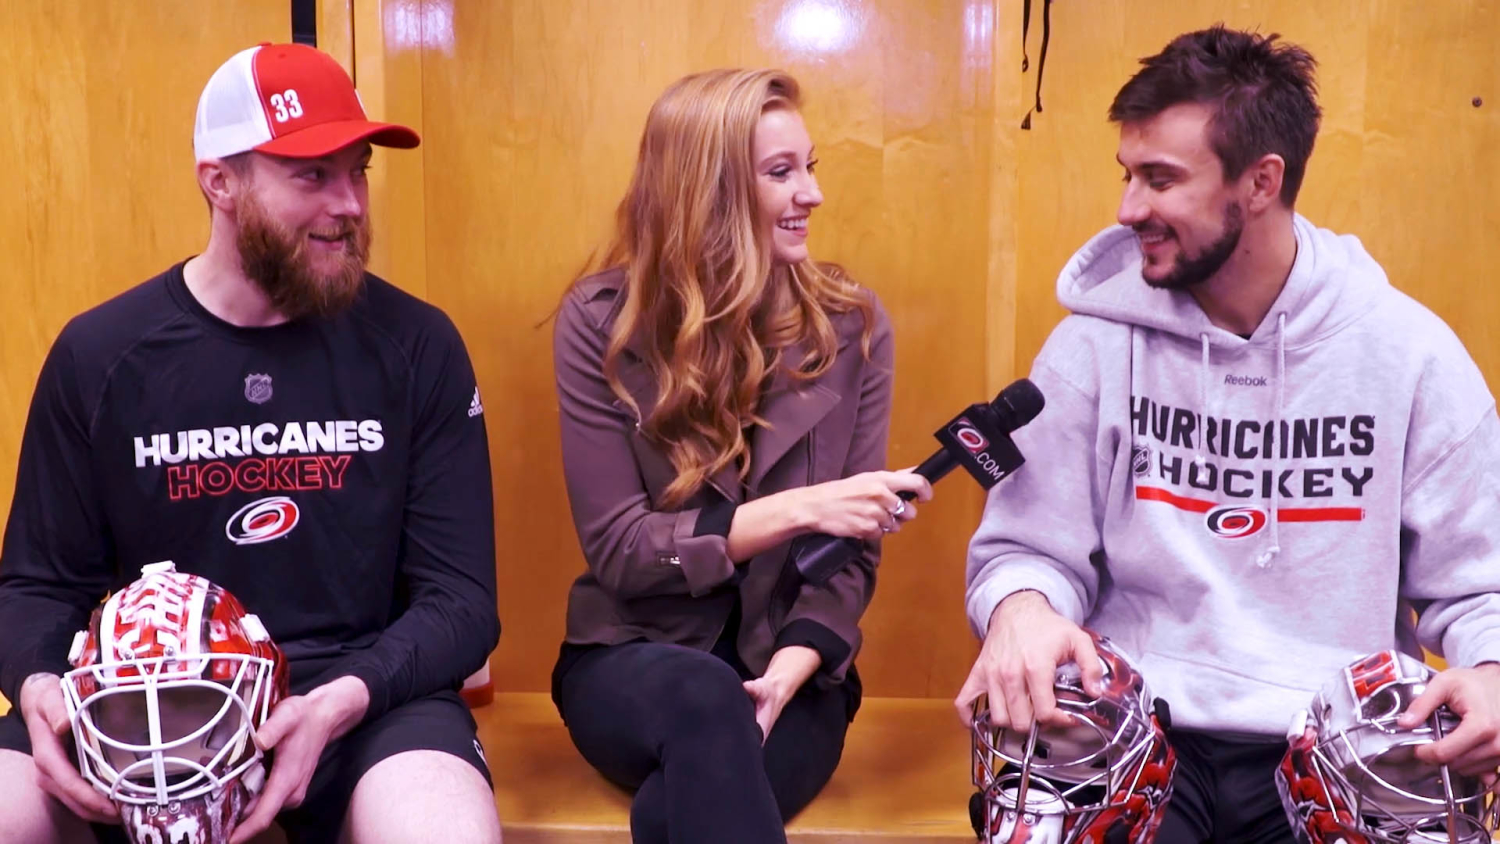 Abby Labar interviews two players from the Carolina Hurricanes